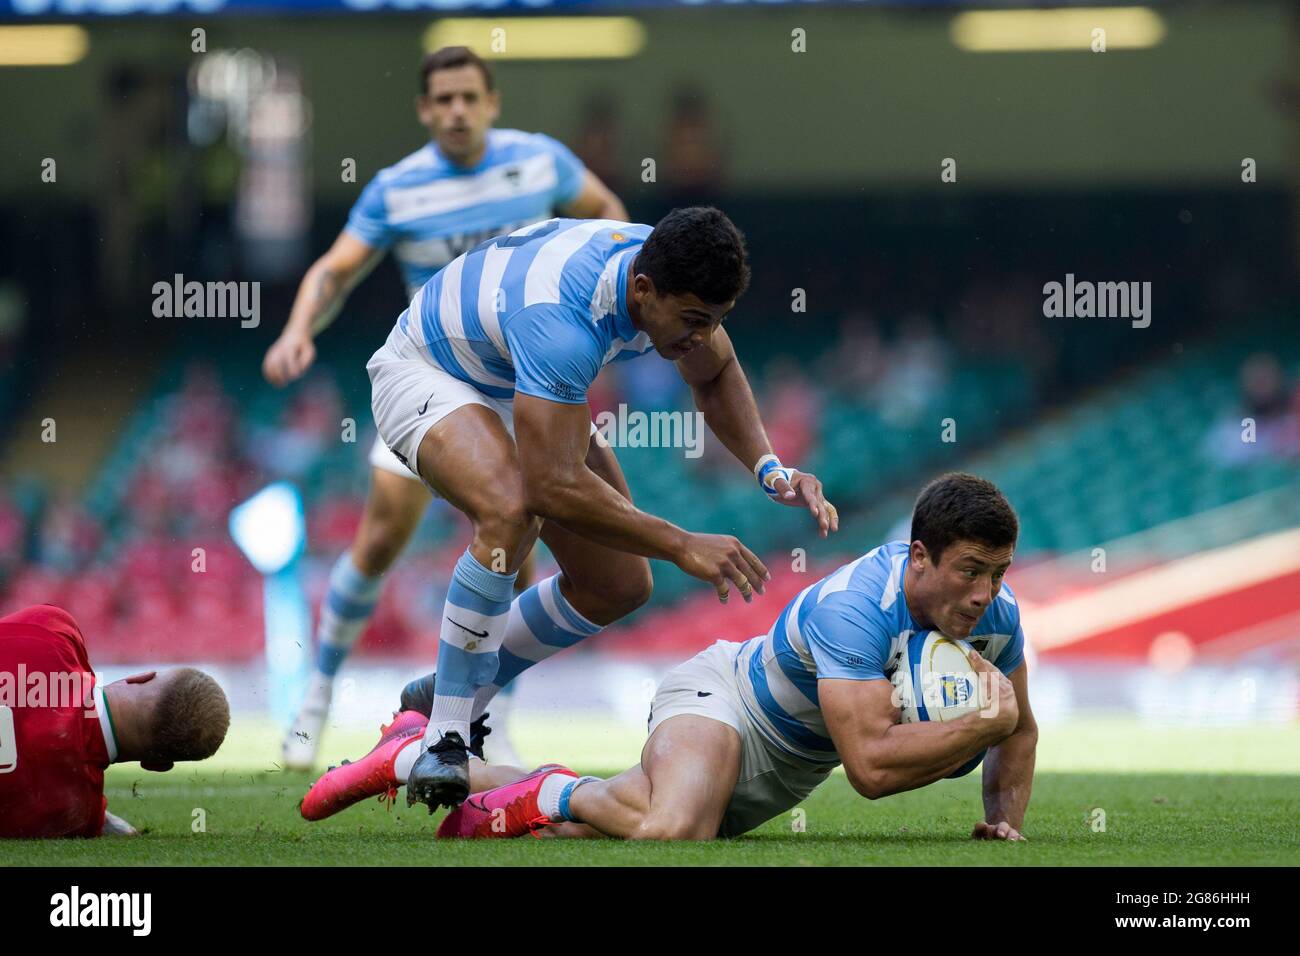 Cardiff, UK. 17th July, 2021. Cardiff, UK. July 17th : Bautista Delguy (Argentina) controls the ball during the 2021 Summer Internationals match between Wales and Argentina at Principality Stadium. Credit: Federico Guerra Morán/Alamy Live News Stock Photo